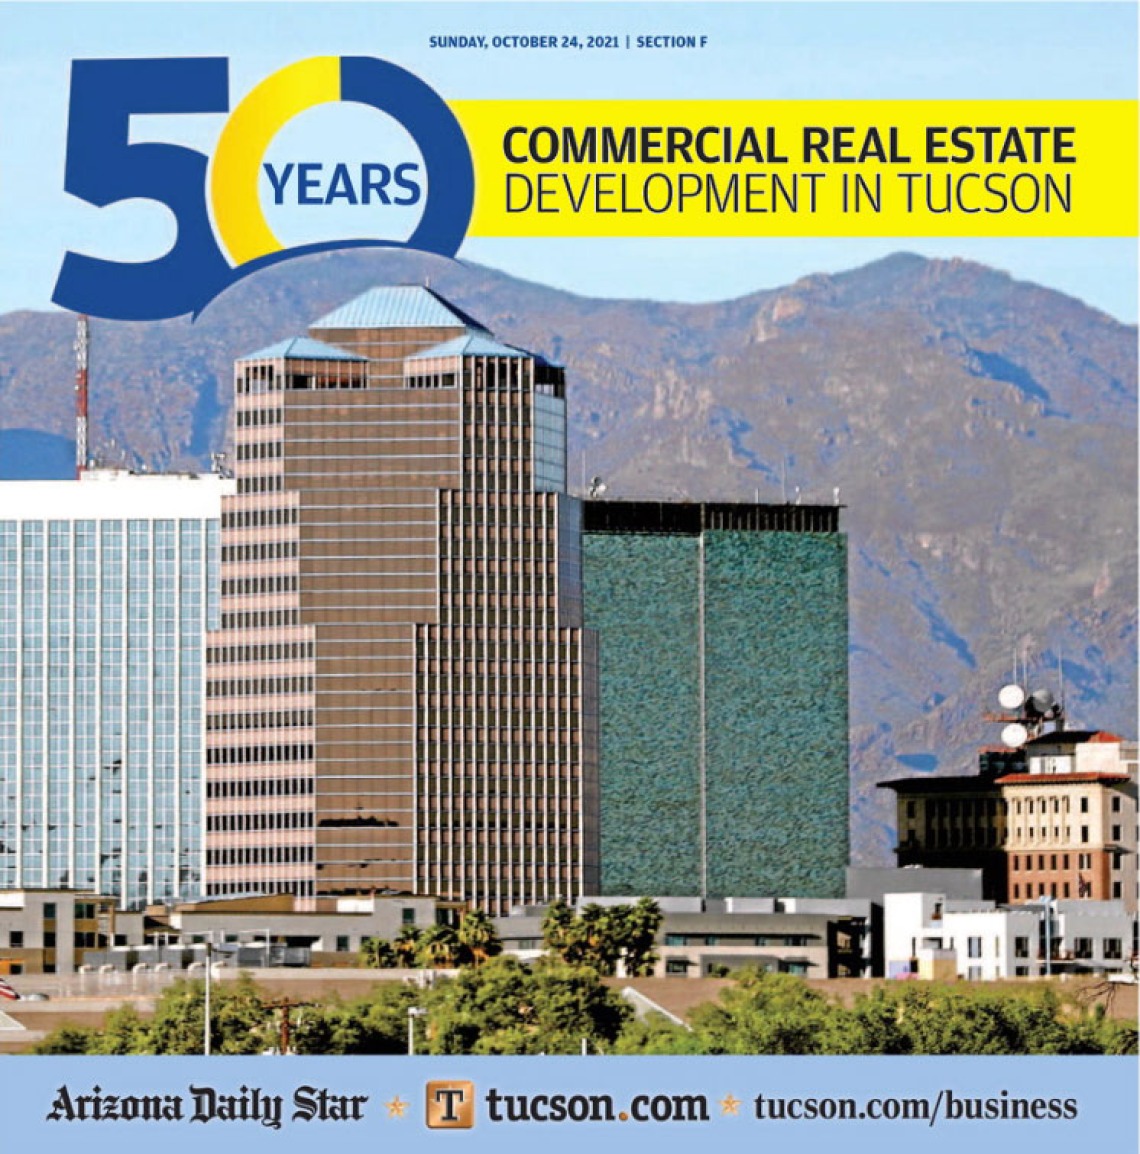 50 Years of Commercial Development in Tucson